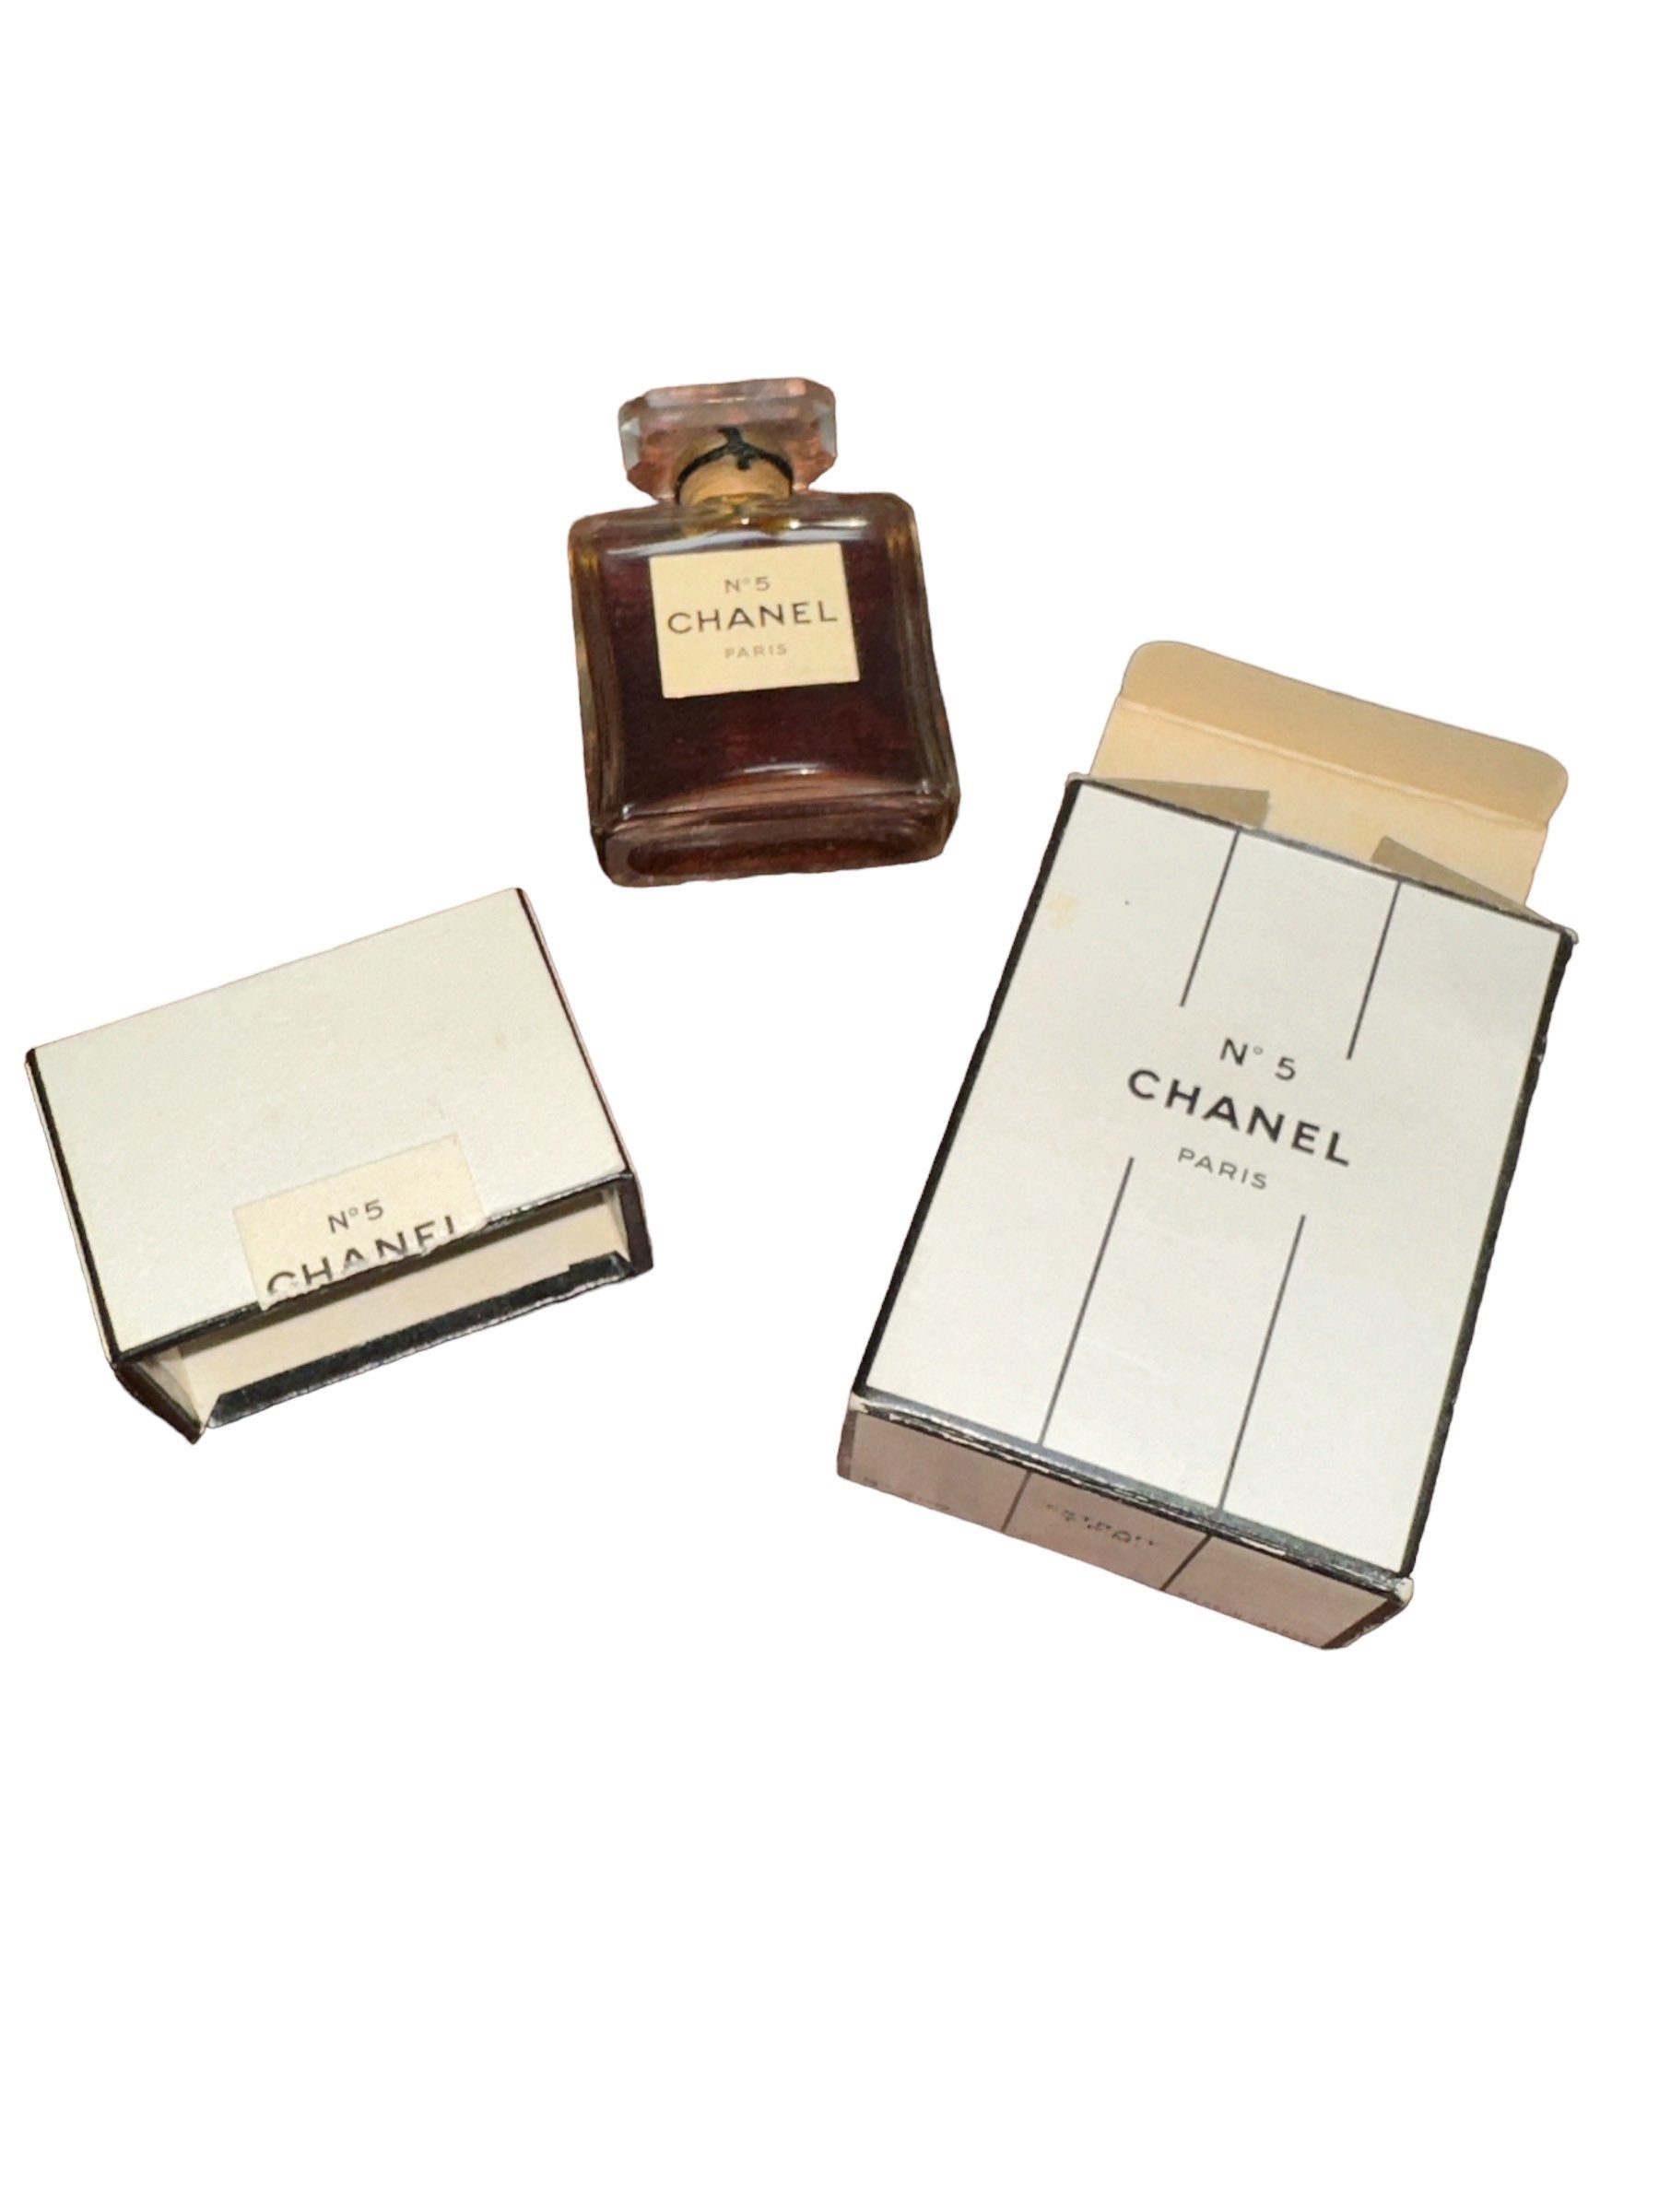 CHANEL No 5 Vintage Extrait TPM perfume bottle with original box. Almost  Full.